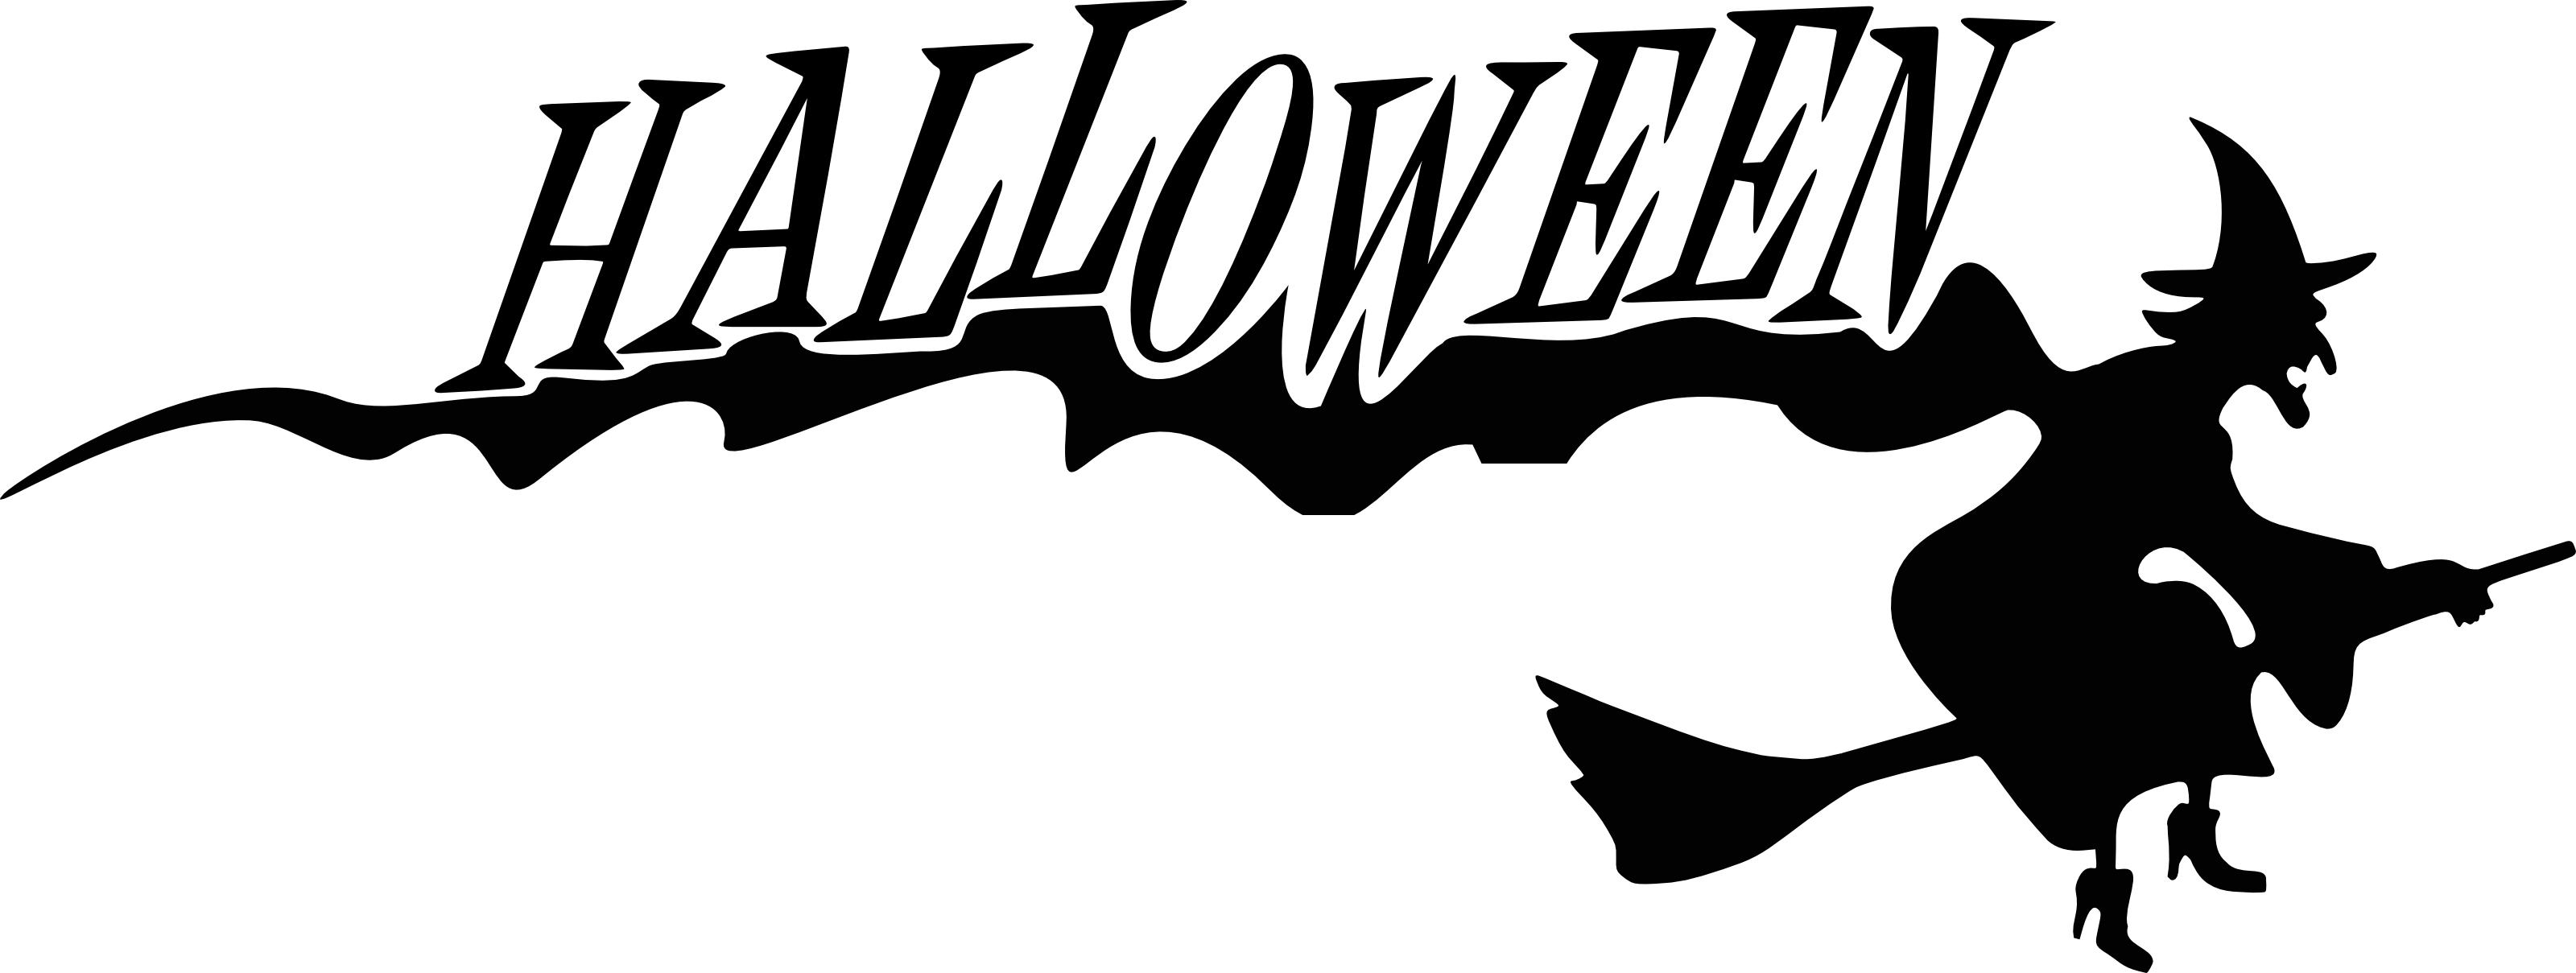 free clipart for halloween - photo #27